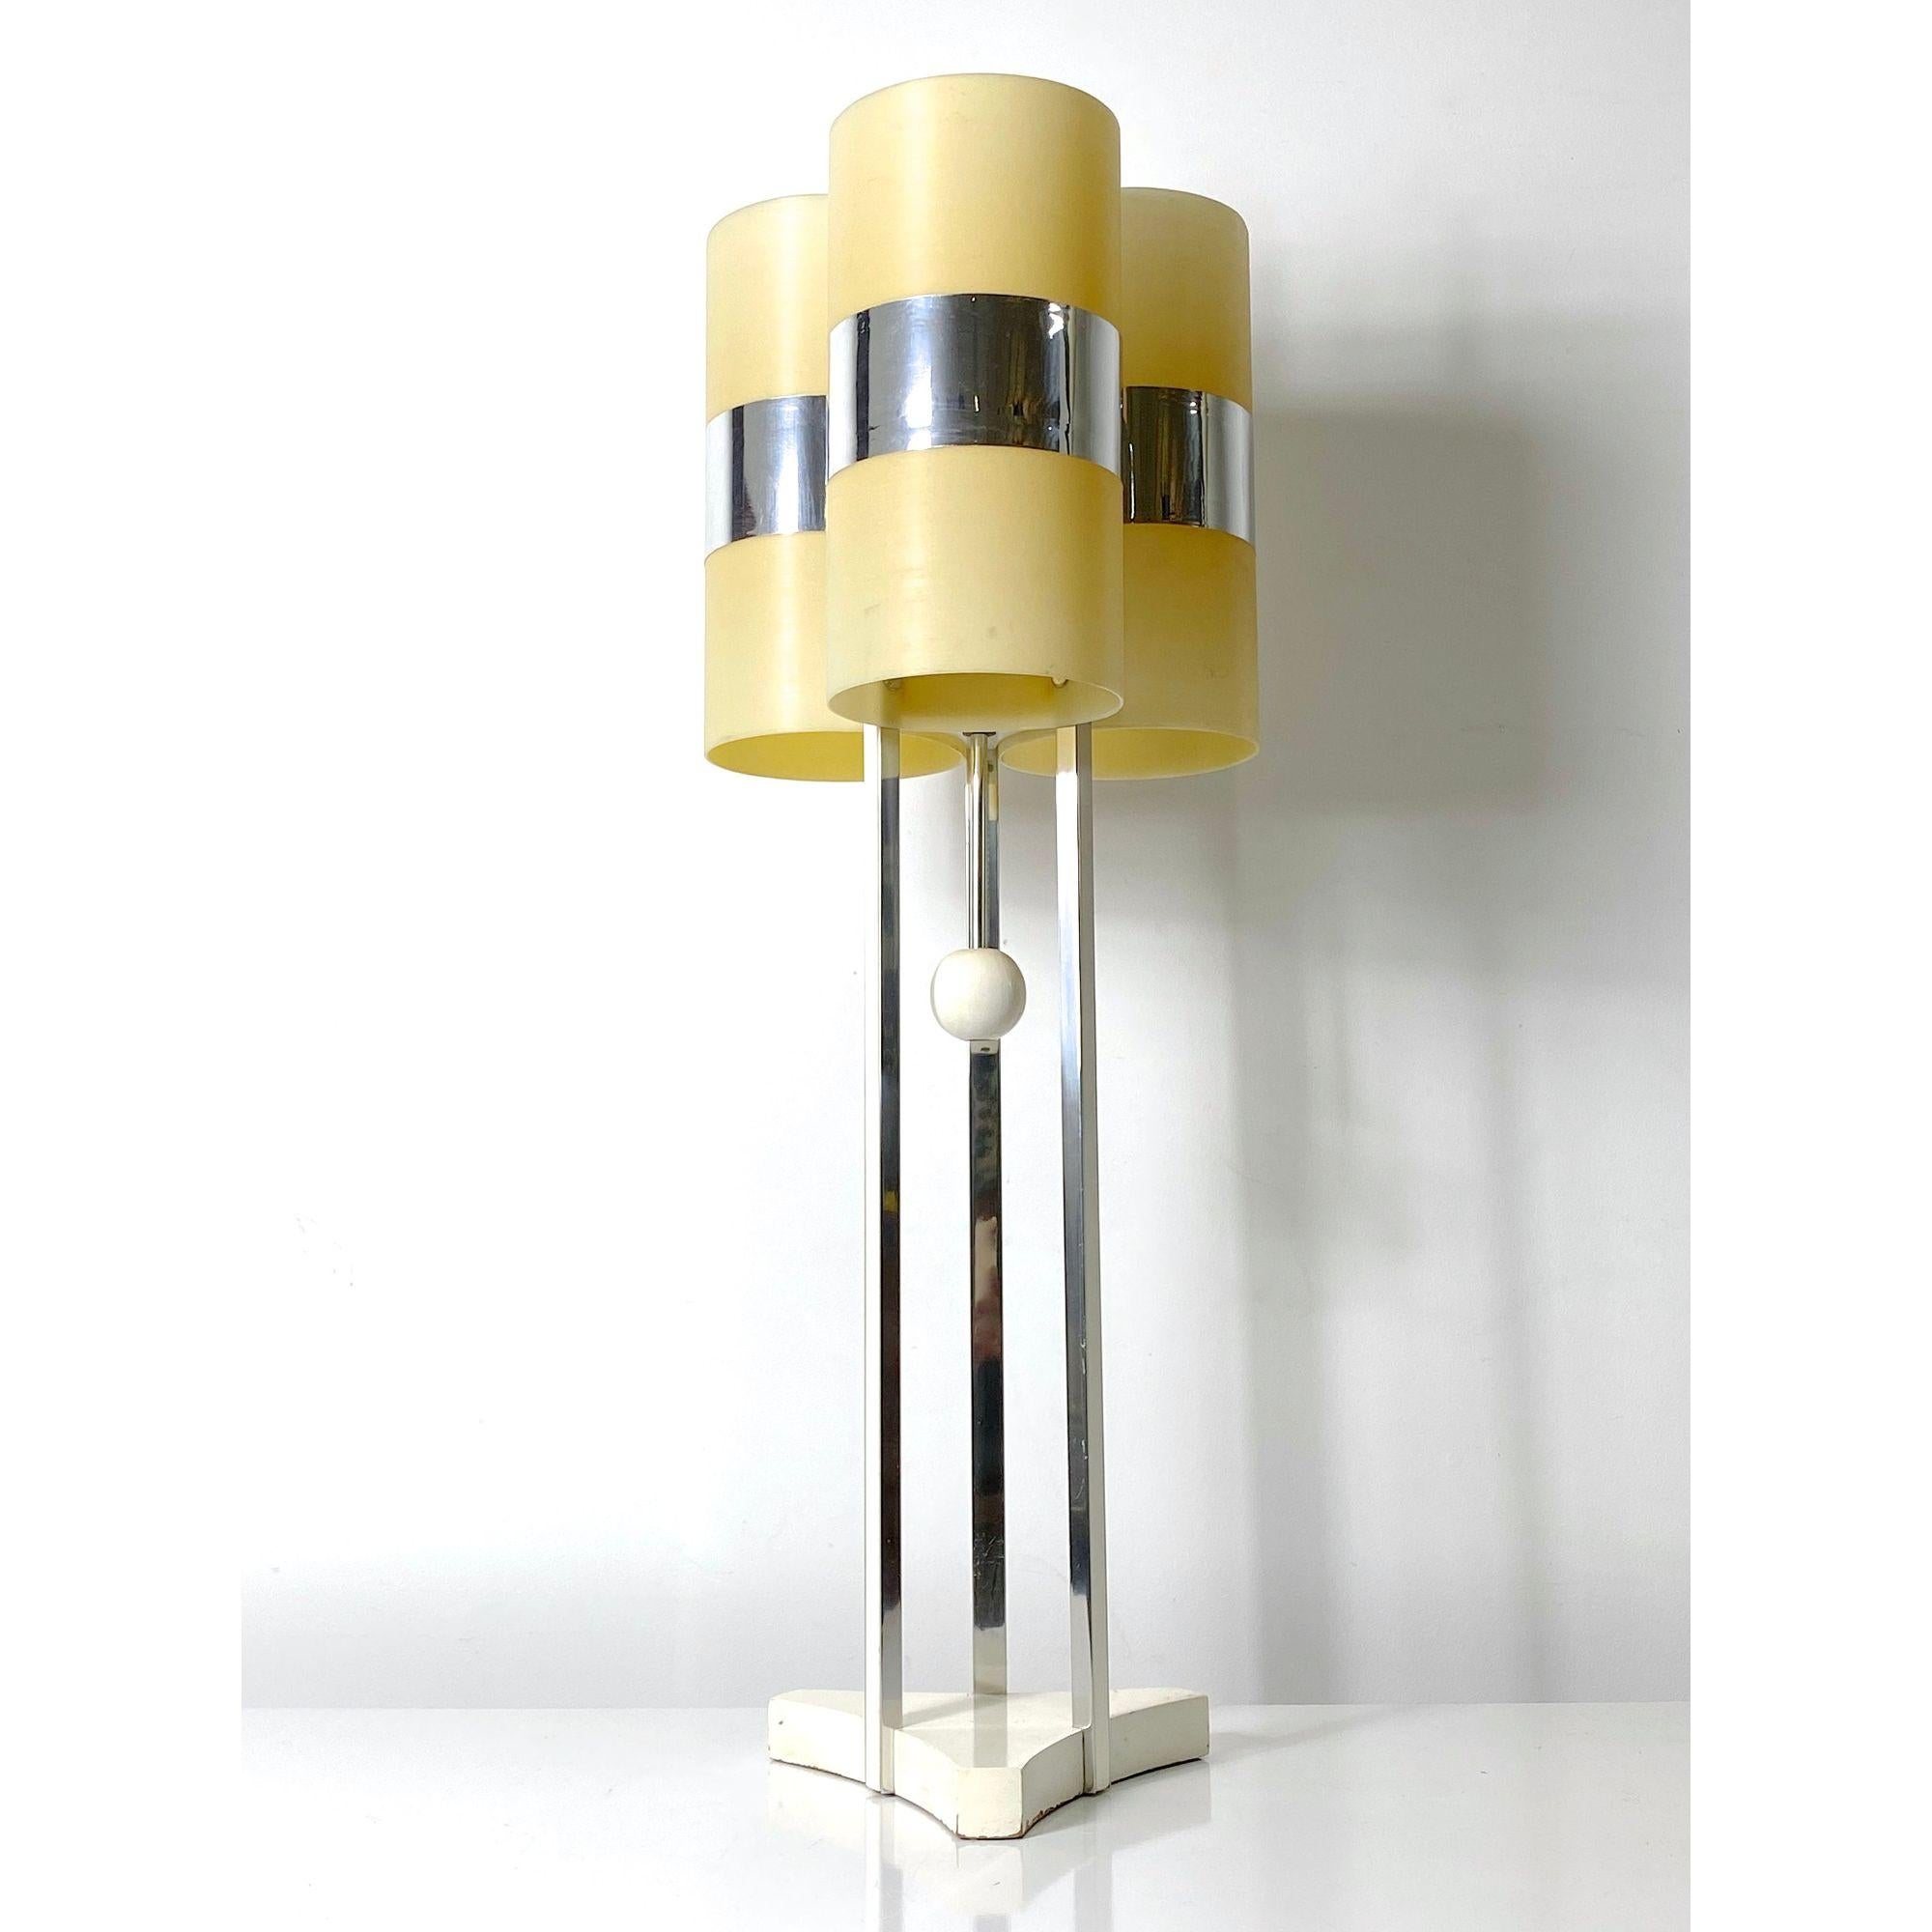 Space Age Rare Table Lamp in Chrome and Acrylic by Modeline, circa 1970s In Good Condition For Sale In Troy, MI